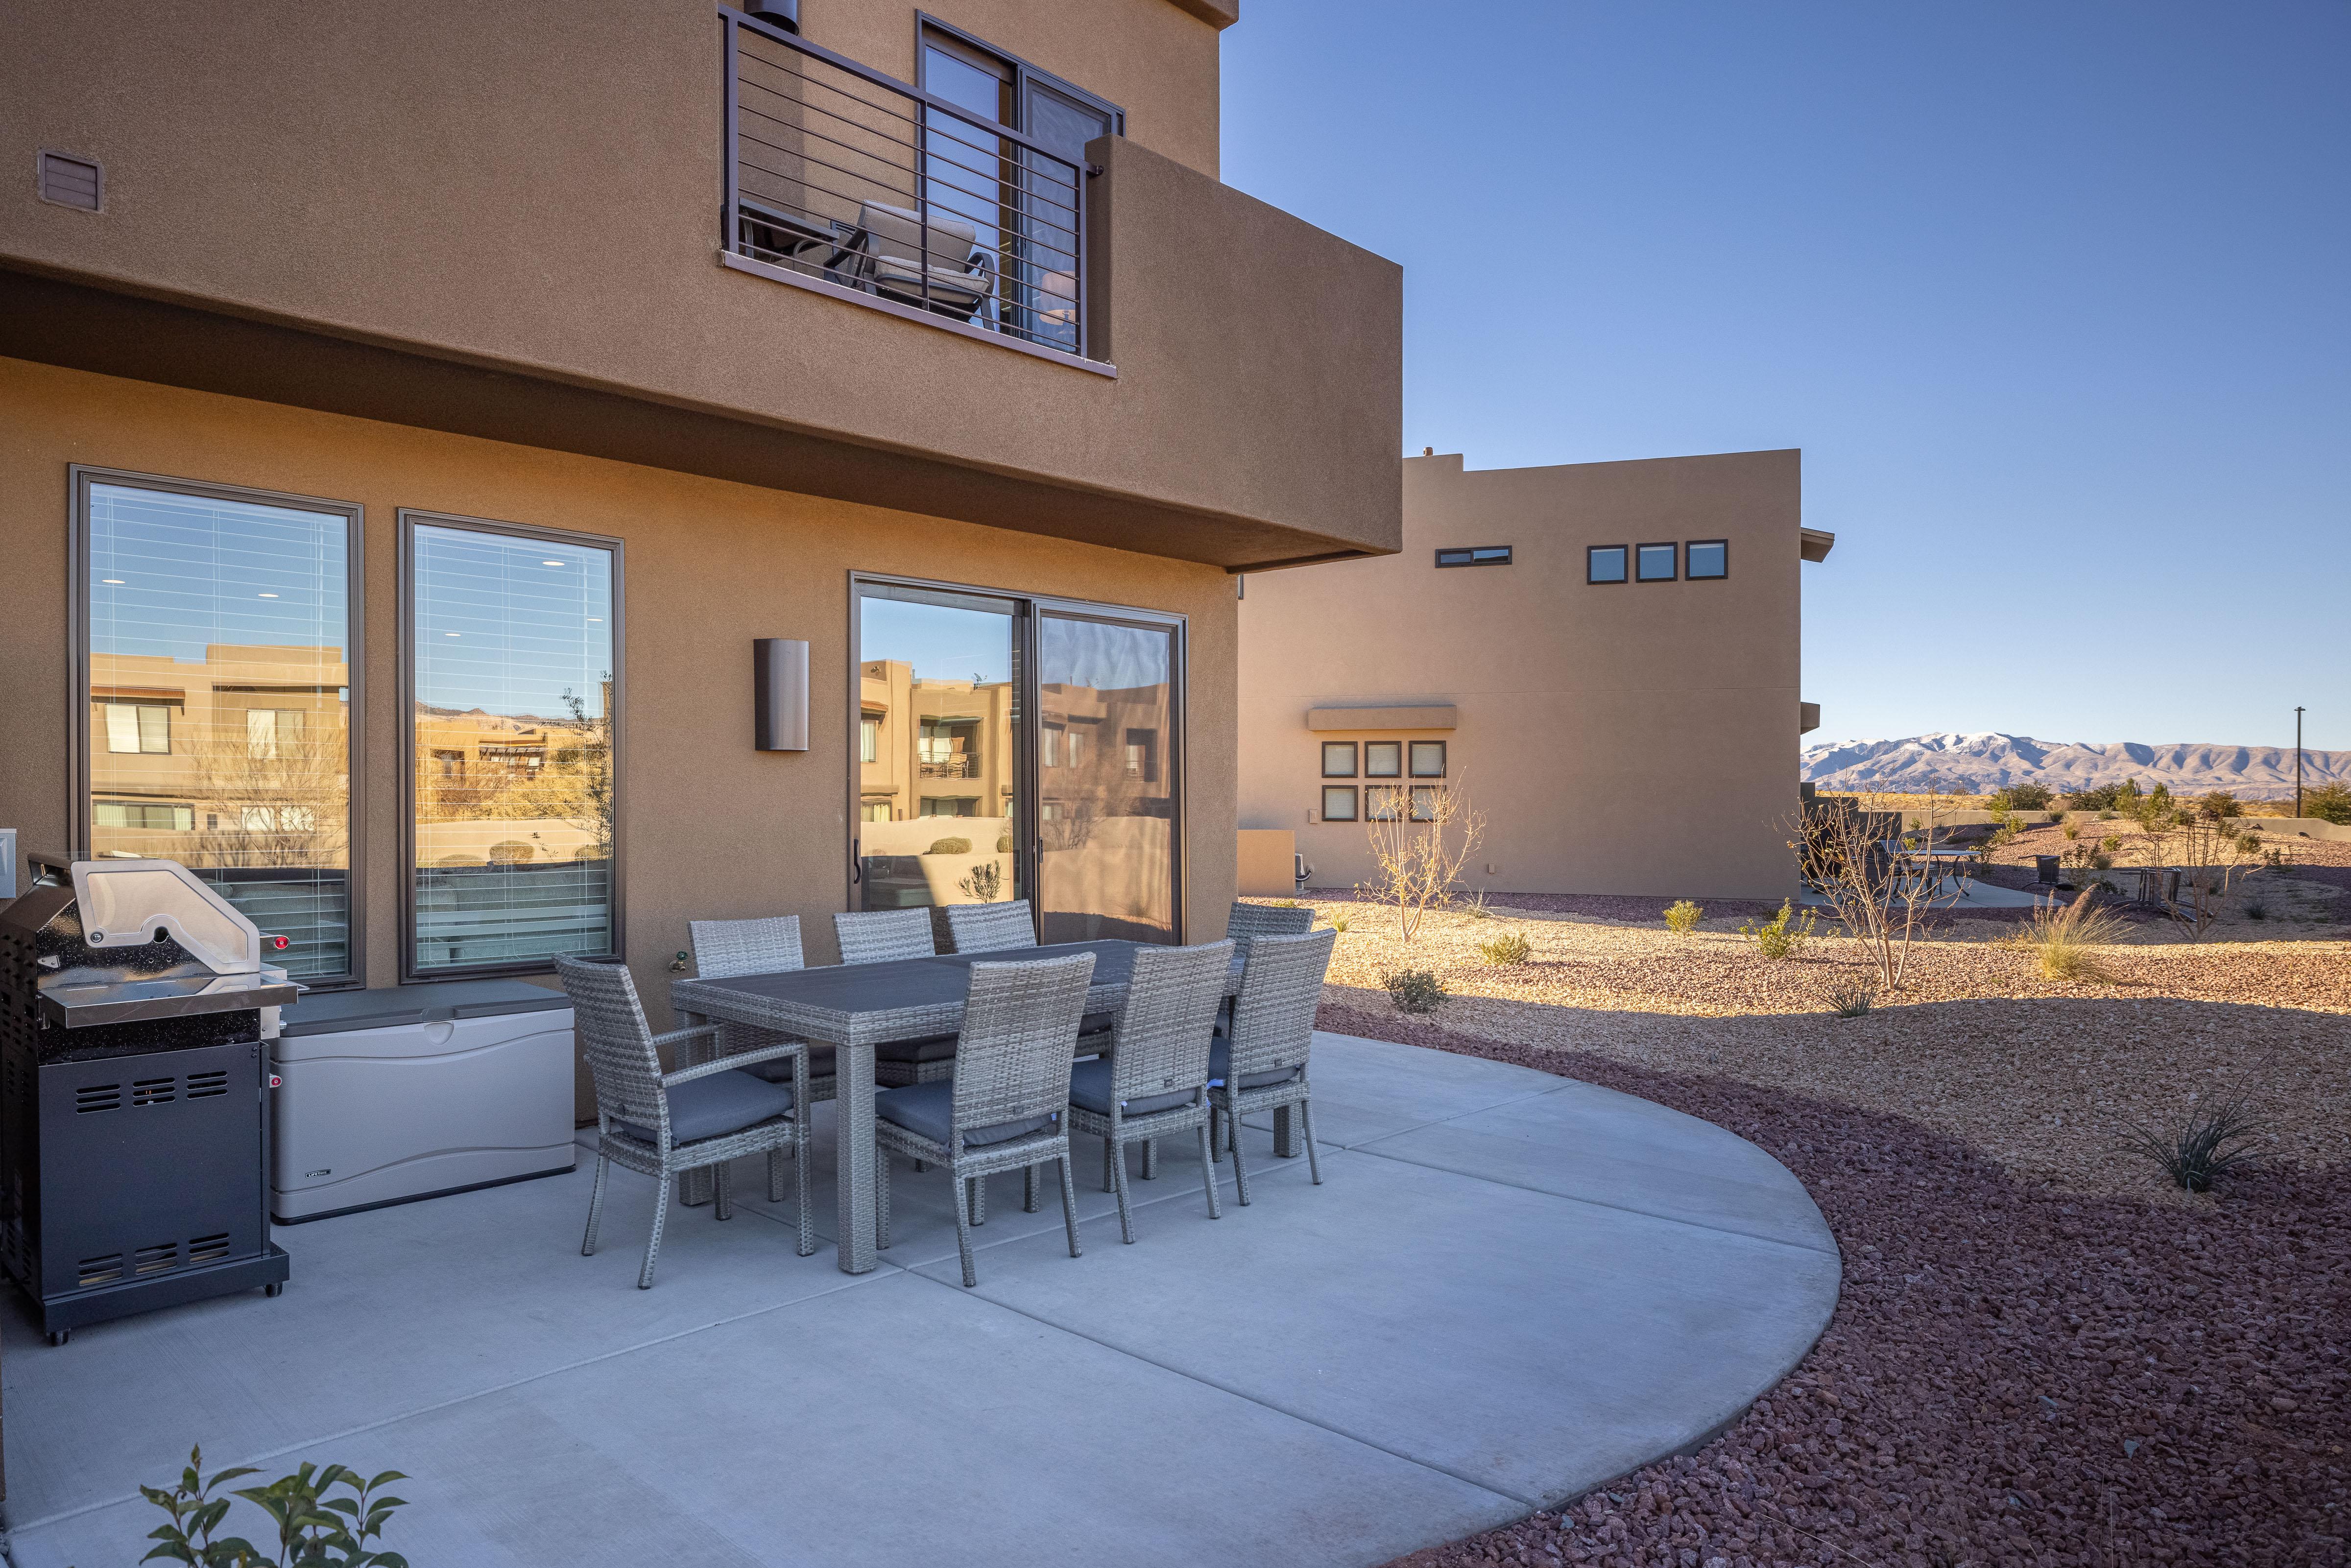 The Back Patio includes an outdoor dining table, BBQ grill, and sliding glass door that leads into the living room.